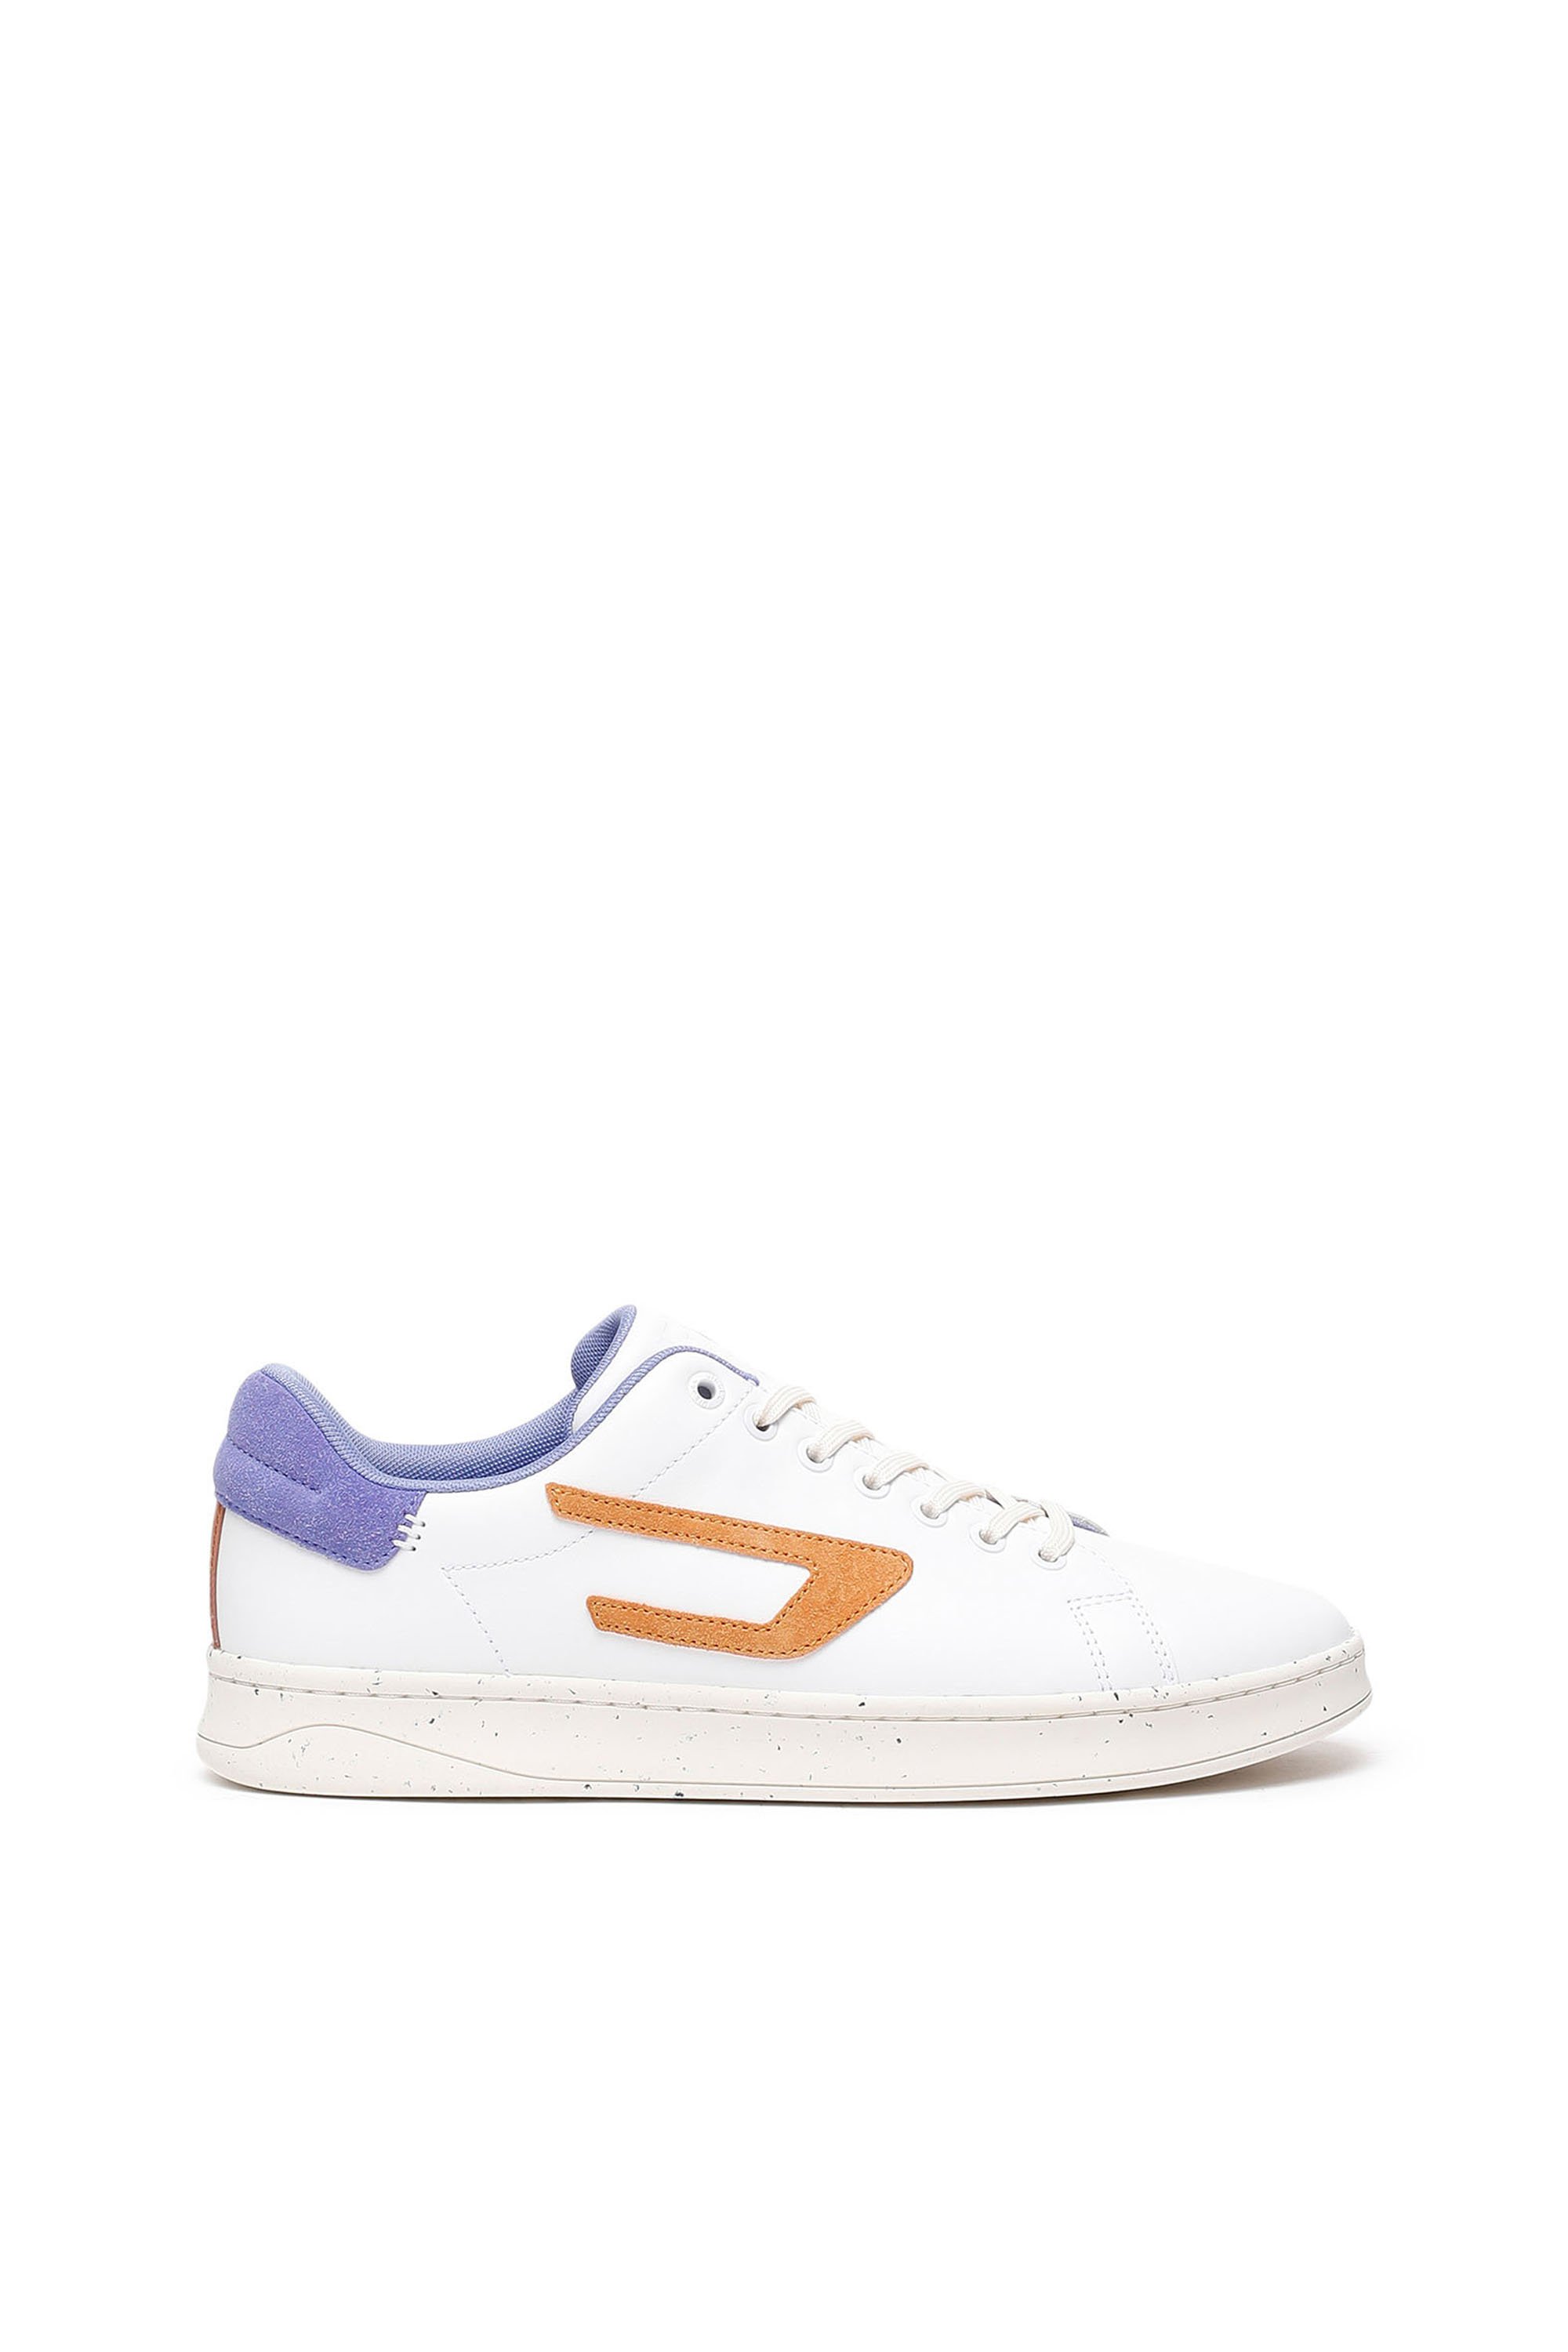 Diesel Low-top Sneakers With D Patch In Multicolor